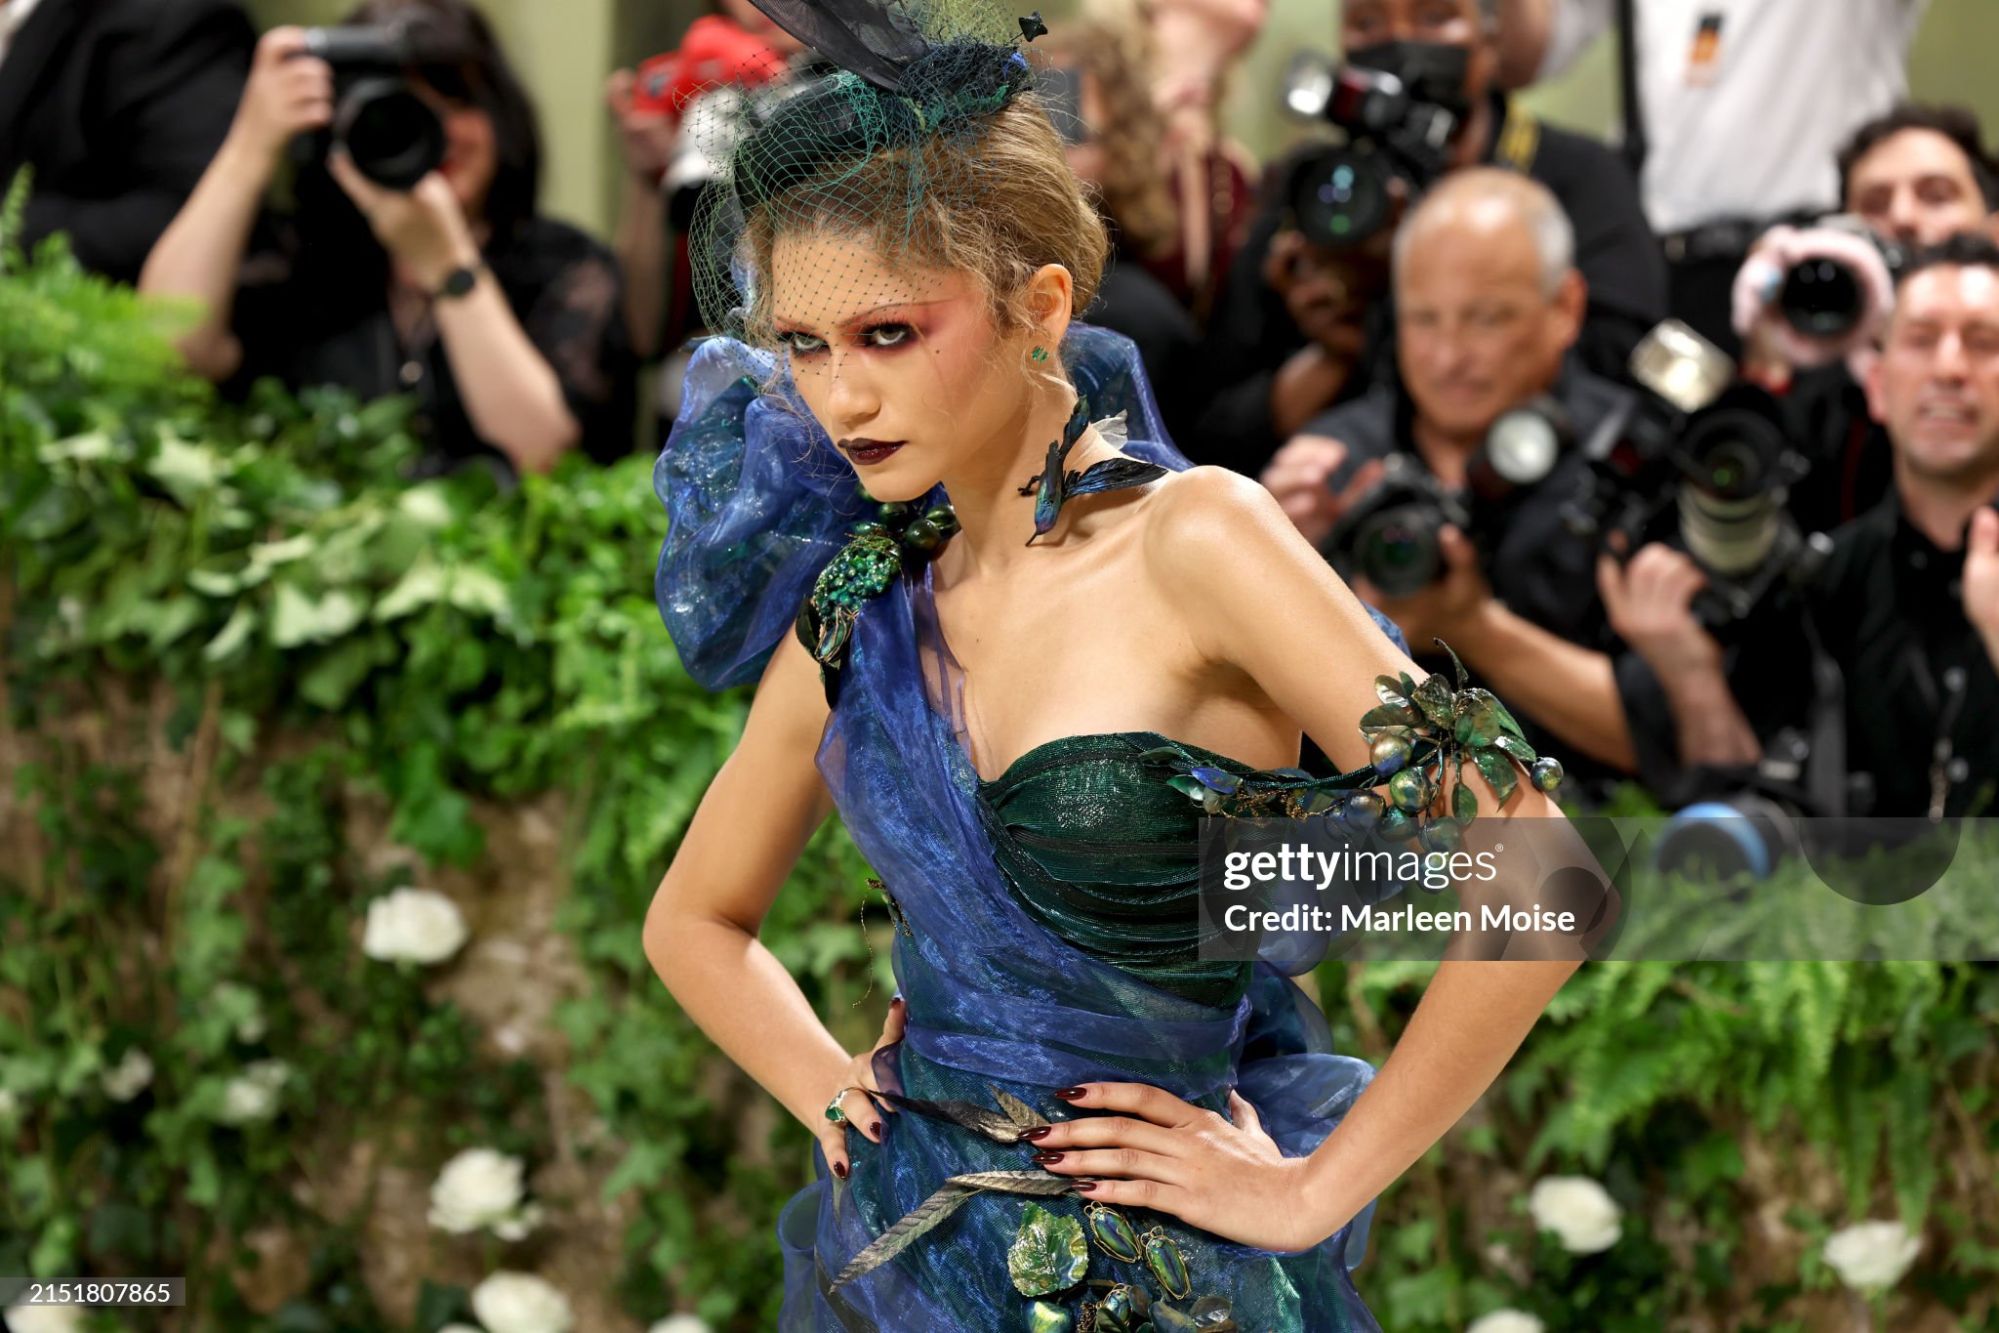 gettyimages-2151807865-2048x2048.jpg